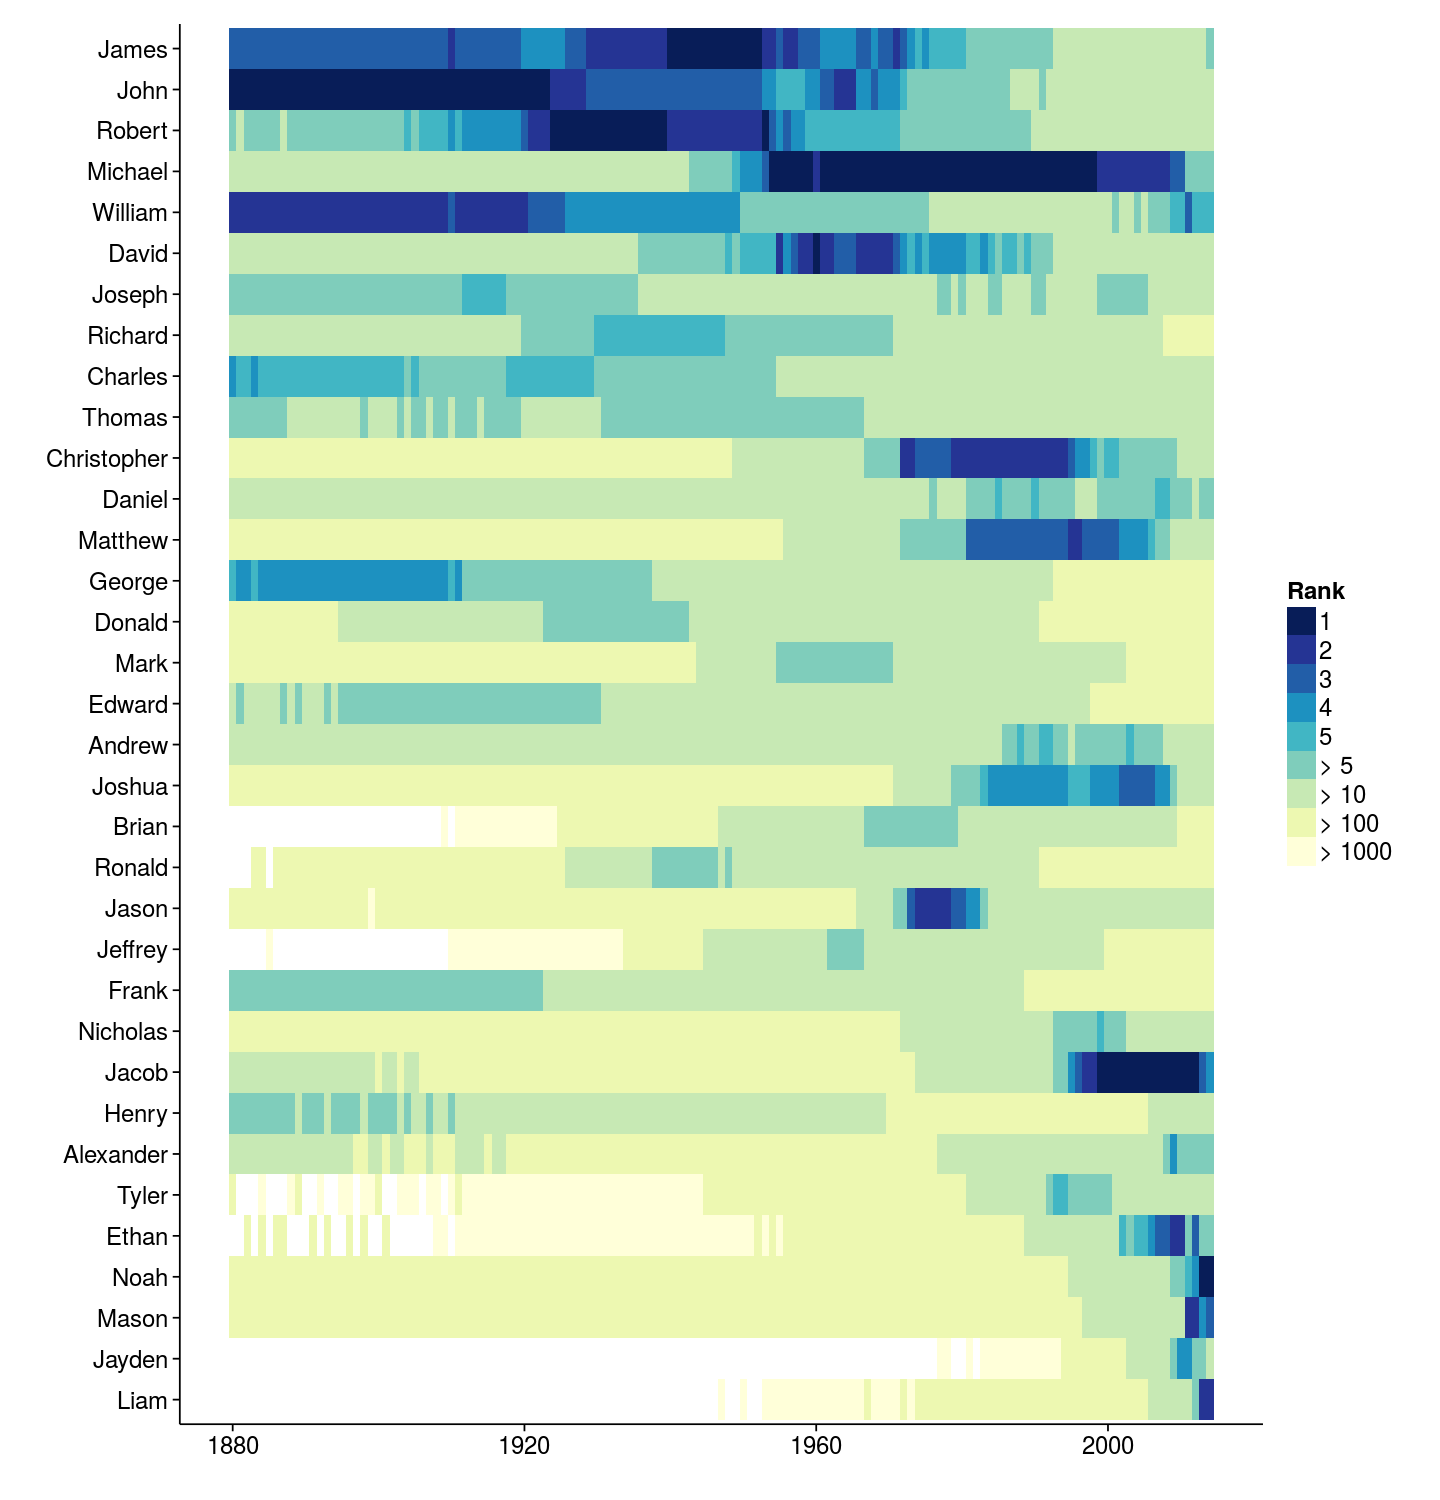 Heat map showing the popularity rank of various male names over time.